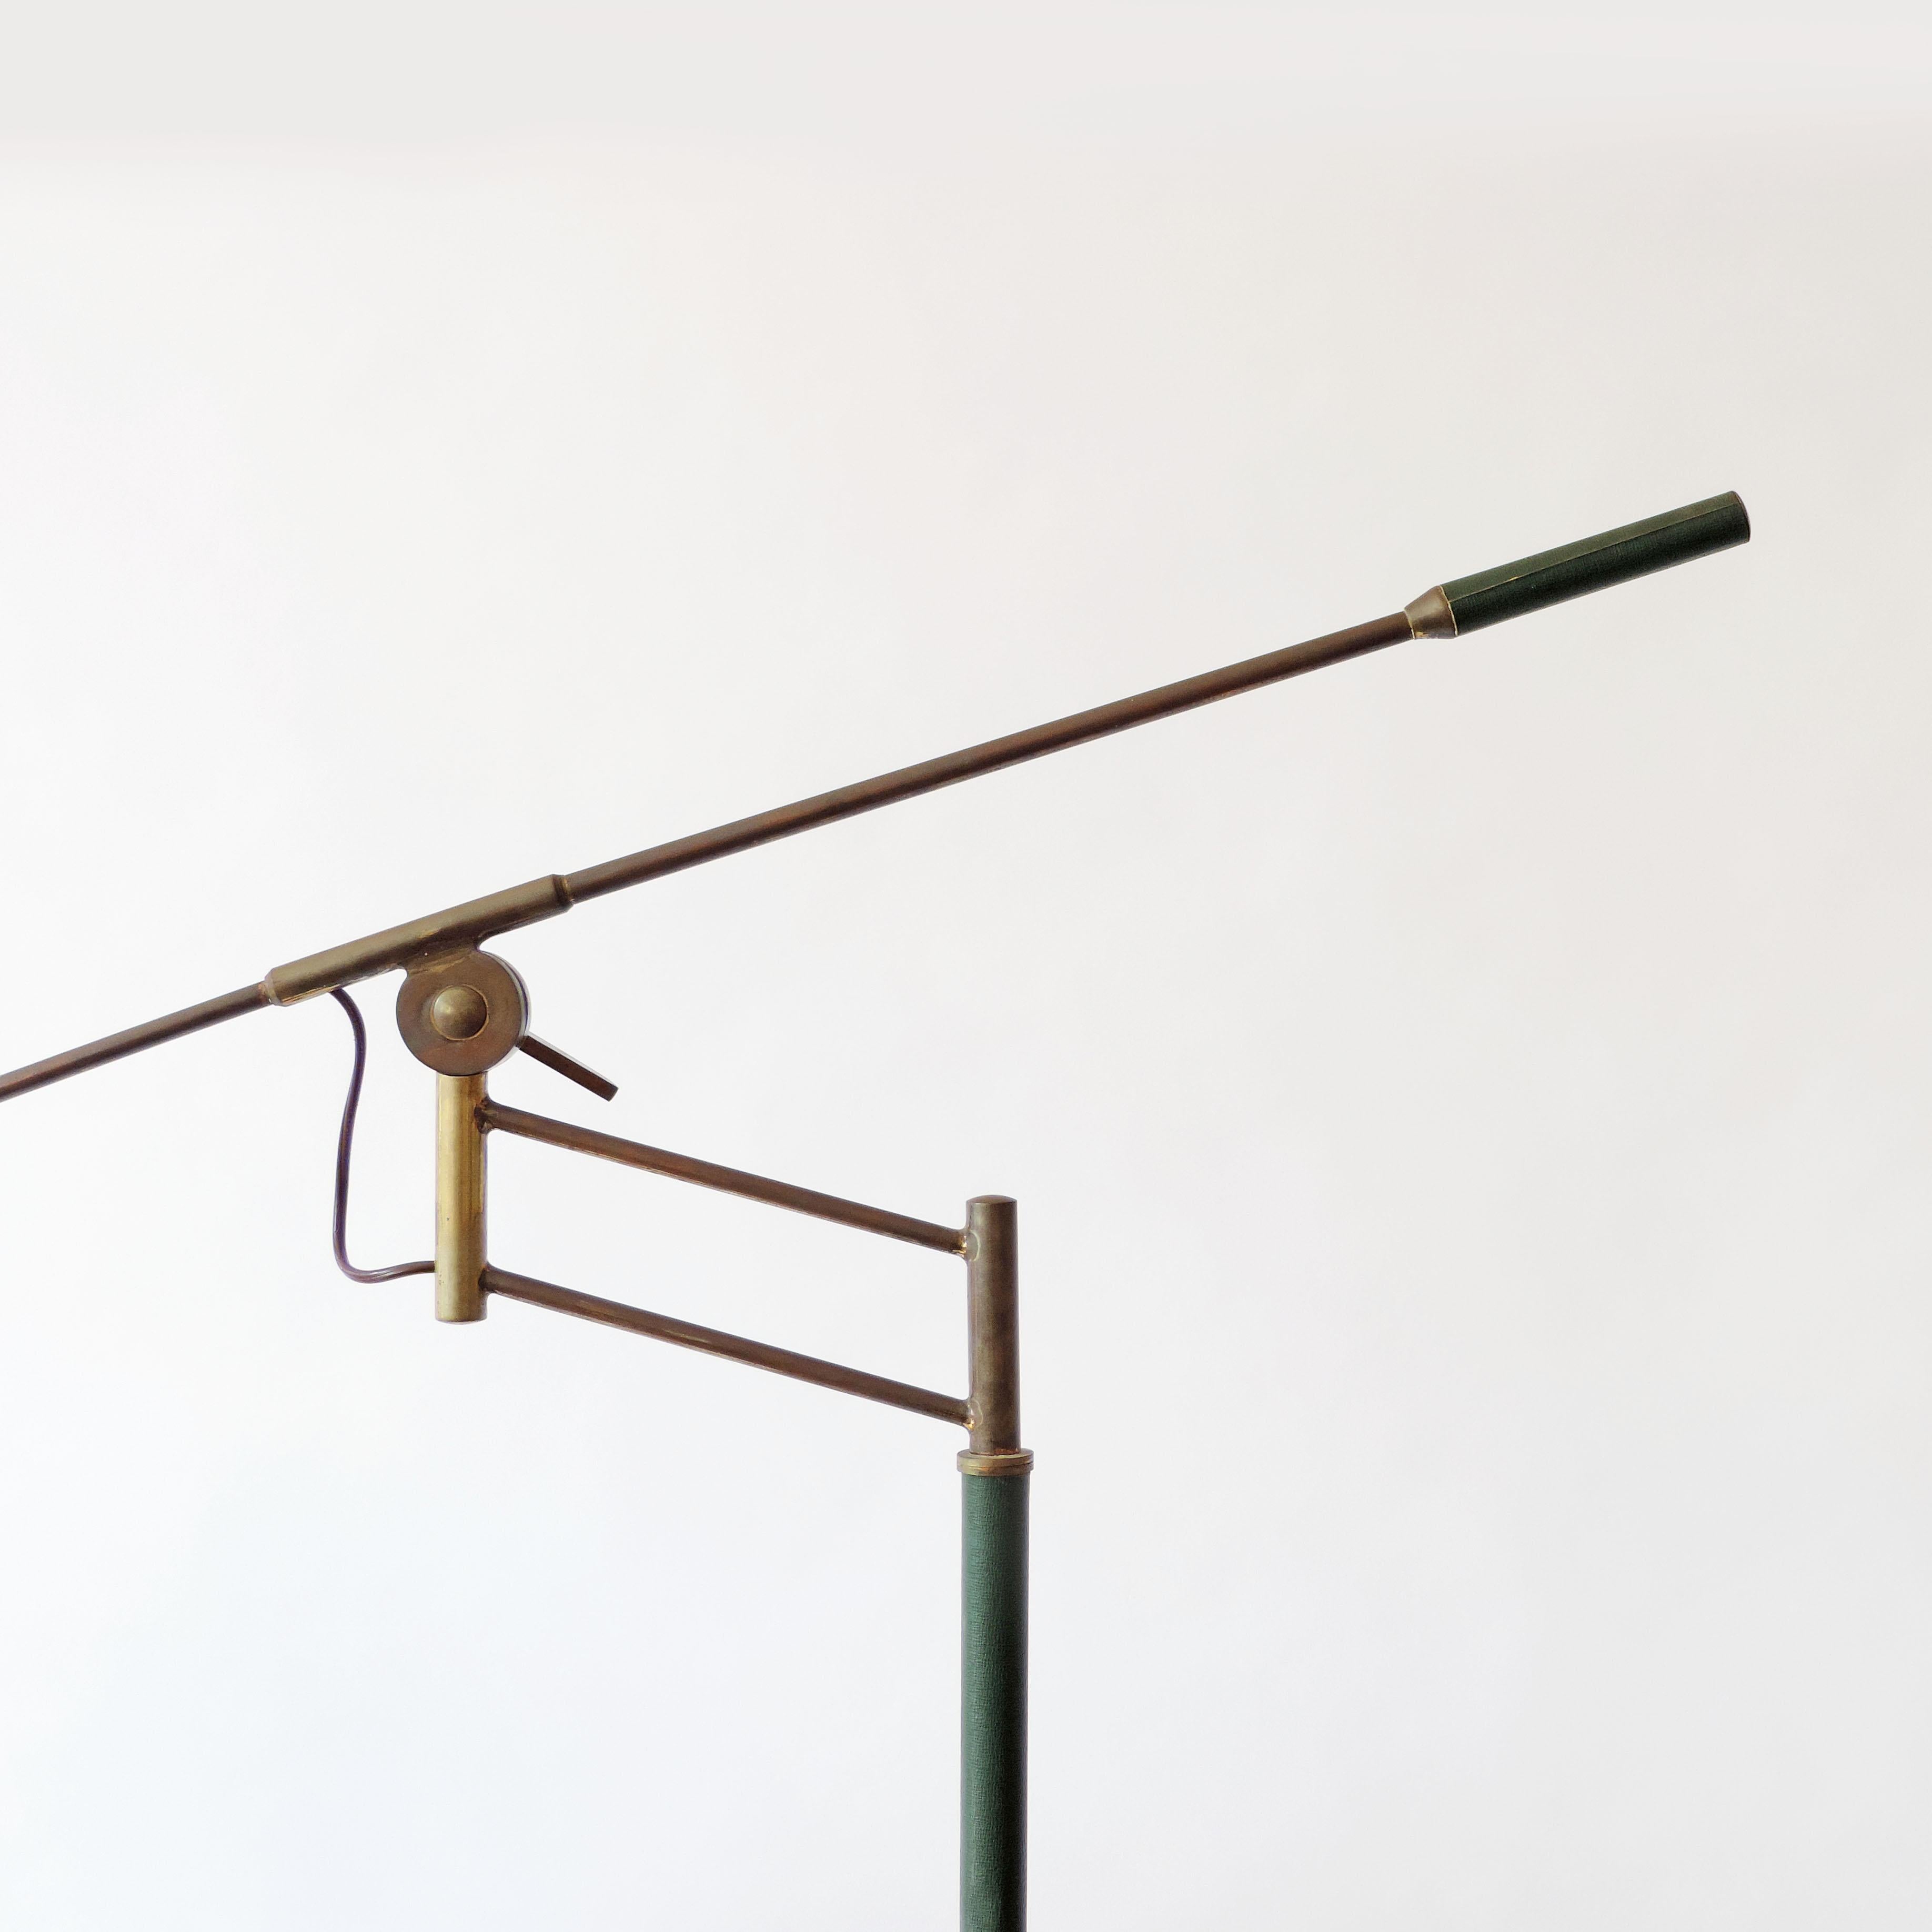 Mid-20th Century Rare Adjustable Italian Floor Lamp in Brass and Green Faux Leather, 1940s For Sale